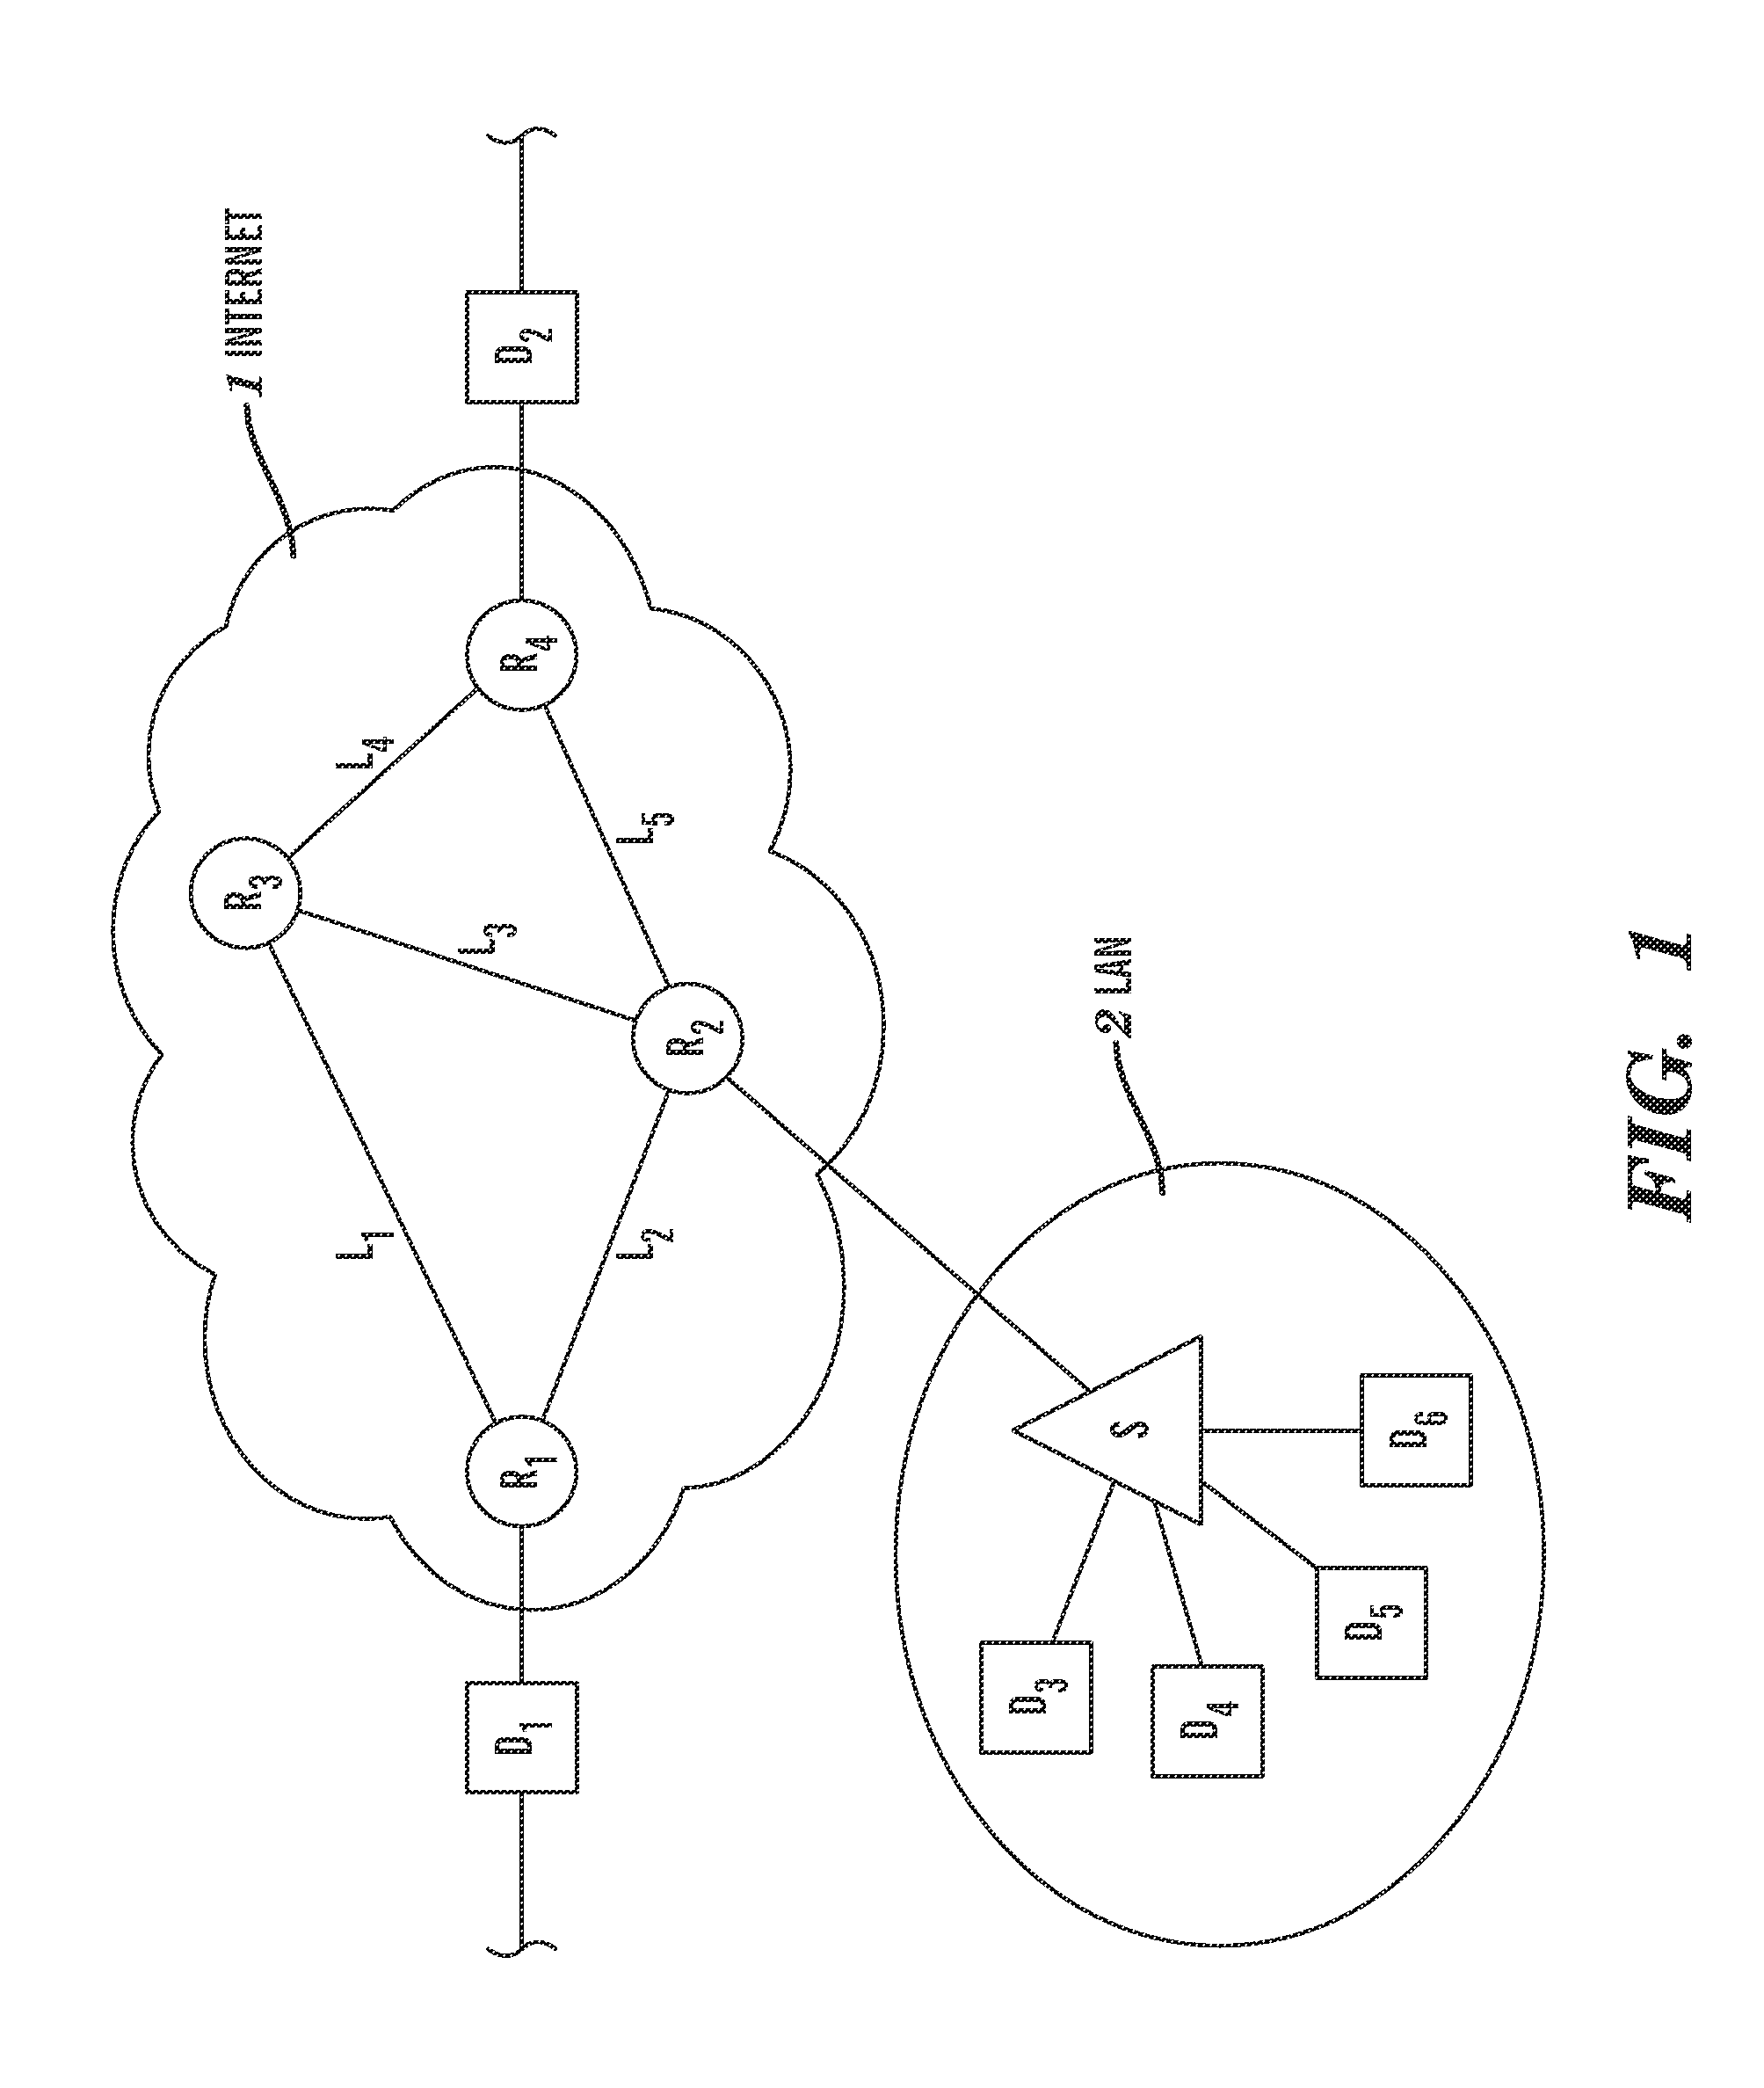 Modification of a switching table of an internet protocol switch